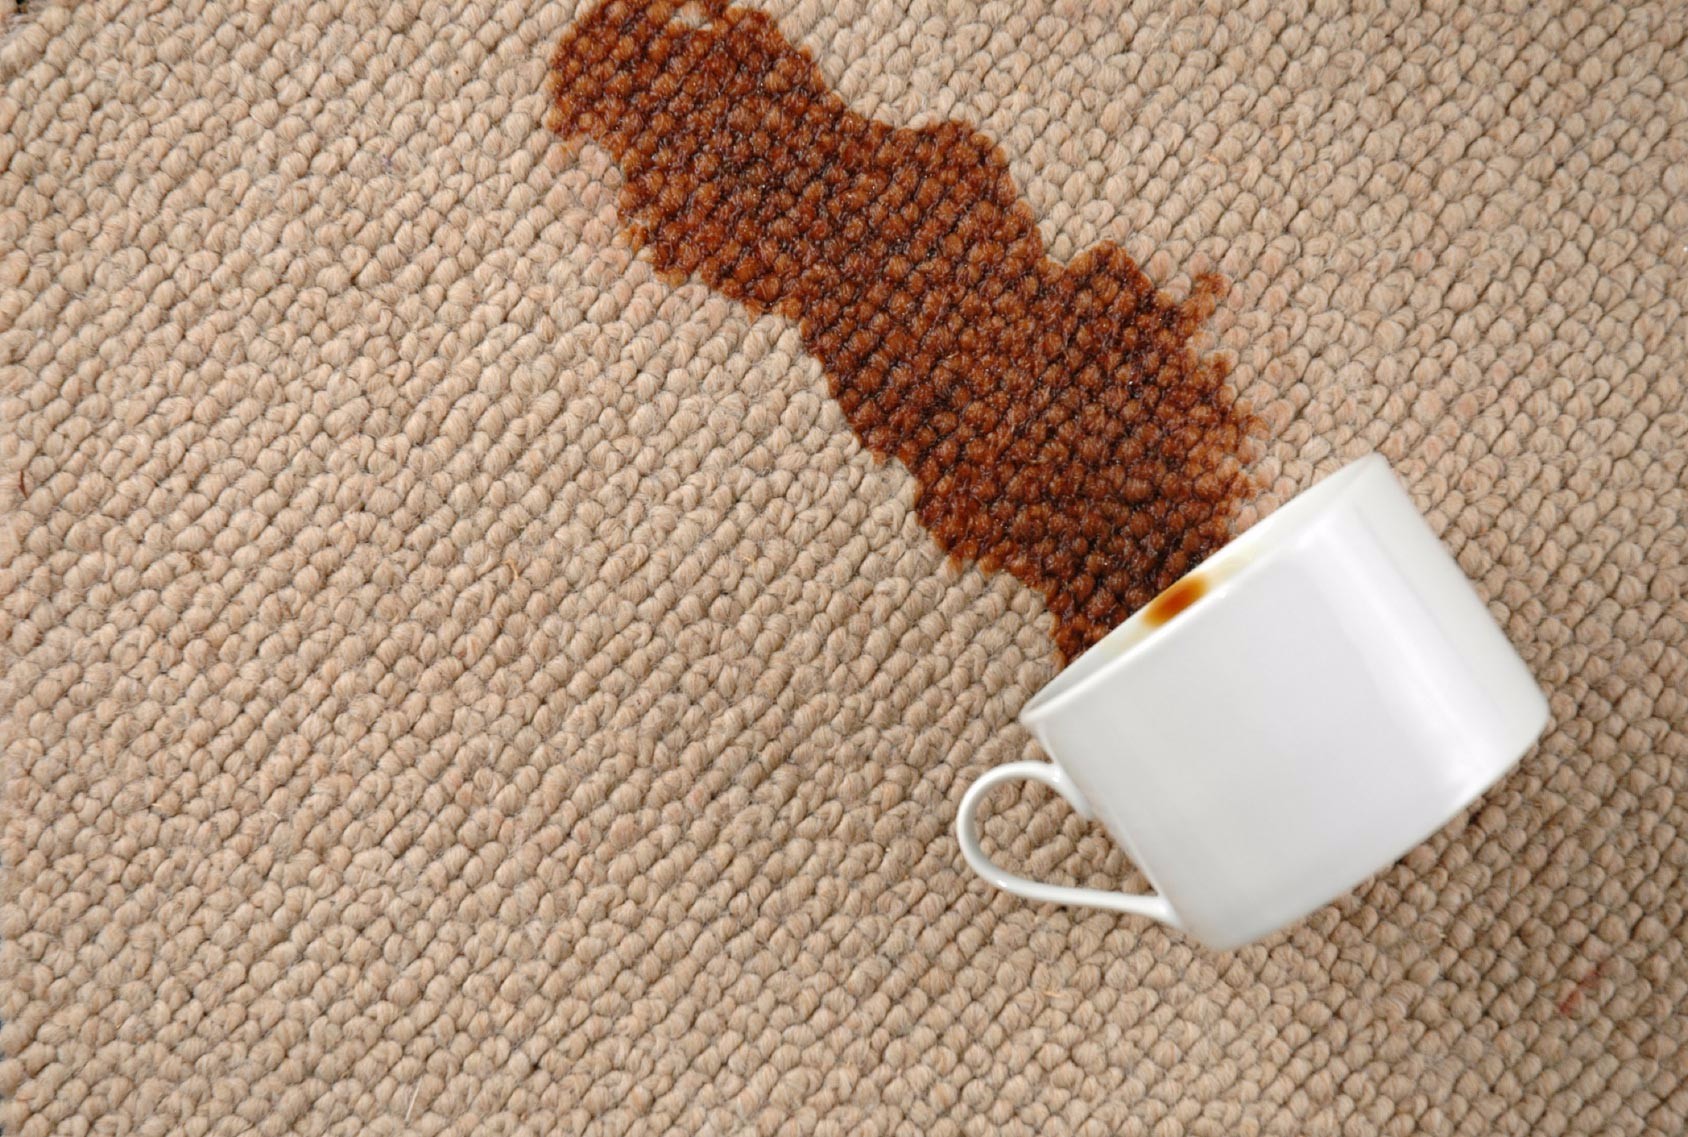 <div>For life's little accidents <button class="btn banners-btn">Schedule a Carpet Cleaning</button></div>